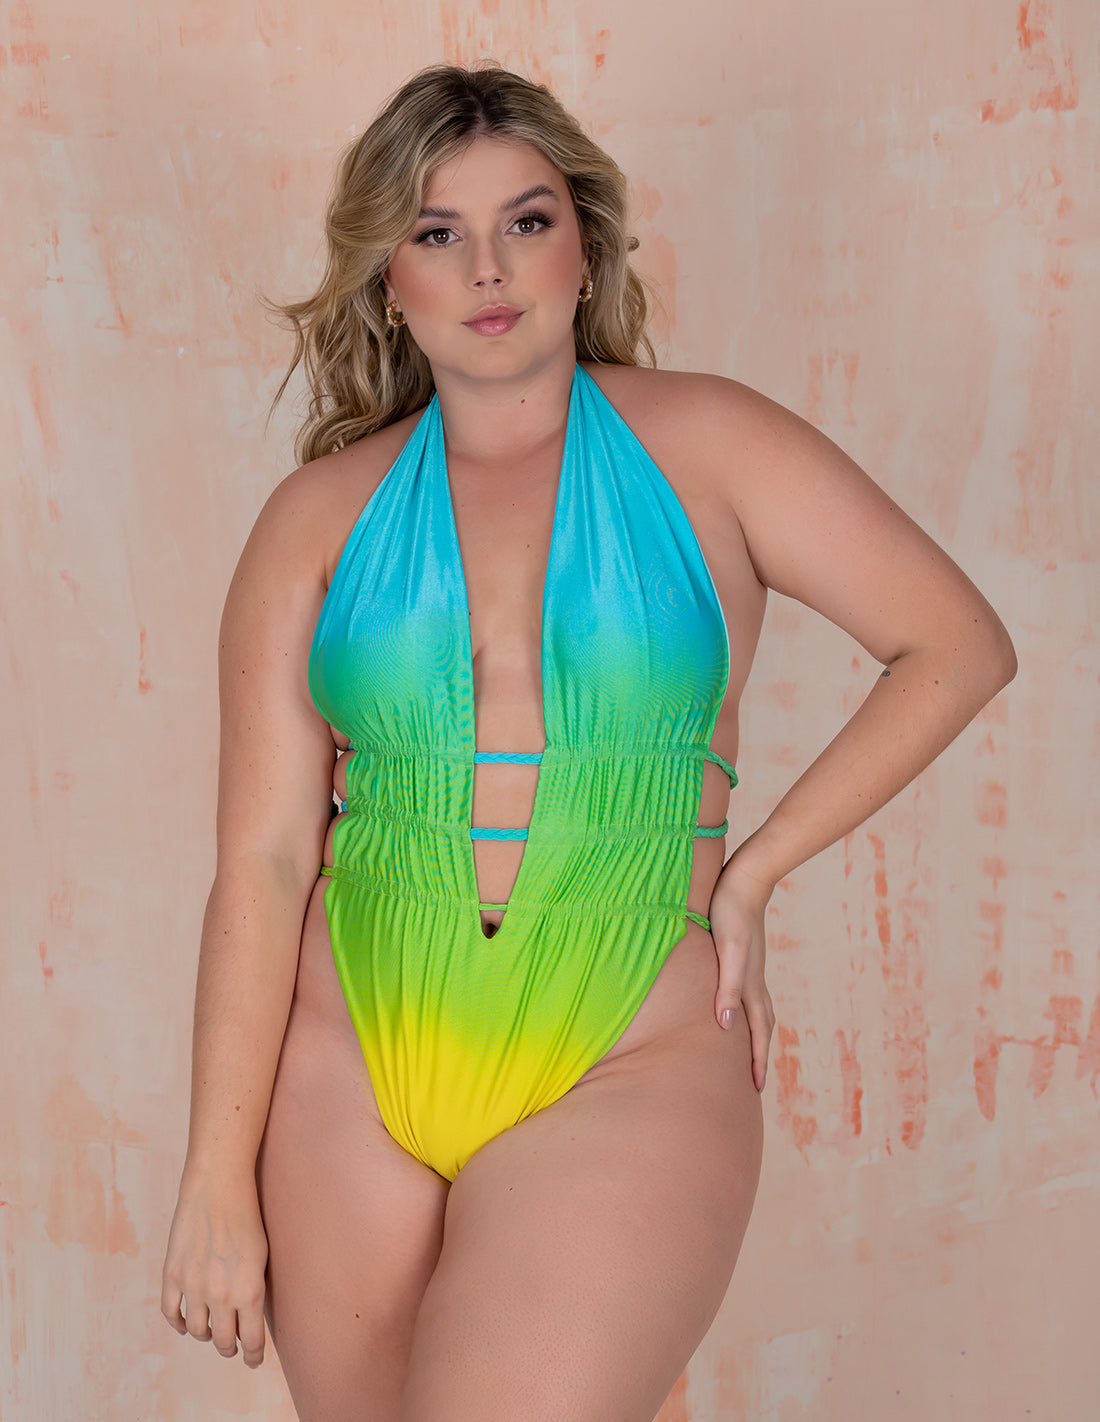 Lotus One Piece Sky Blue + Green + Yellow. Hand-Dyed One Piece With Hand Woven Macramé In Sky Blue + Green + Yellow. Entreaguas